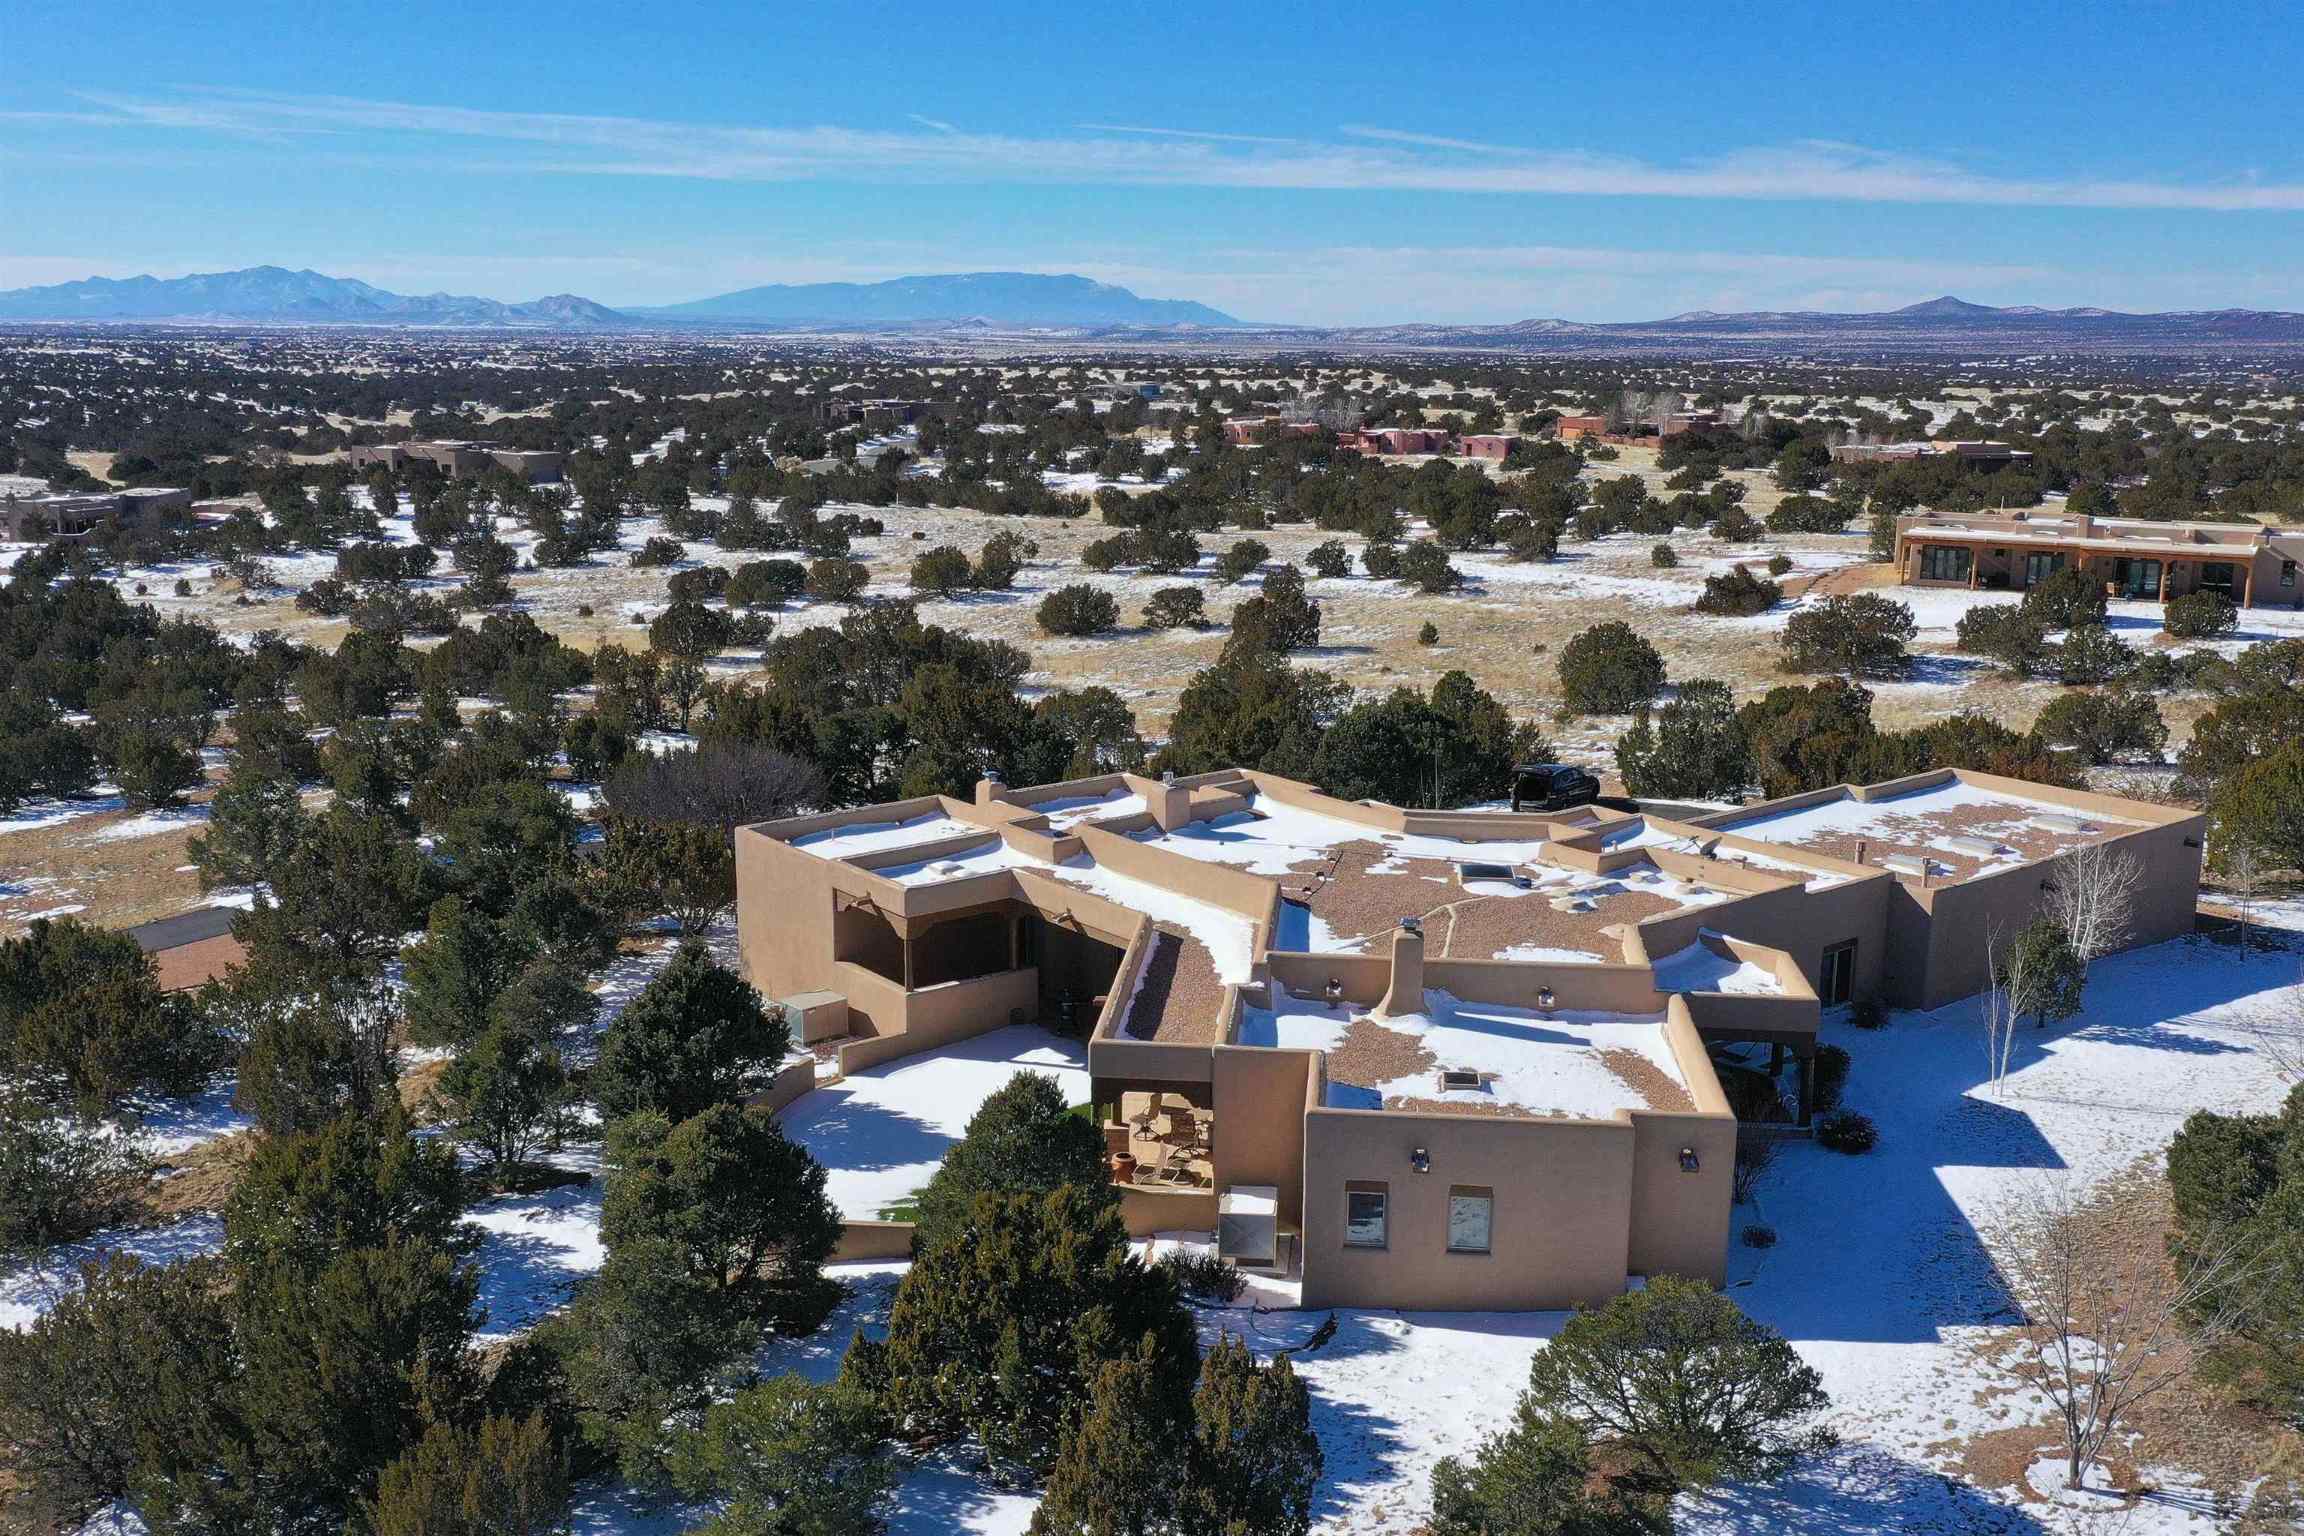 11 W. Sand Sage, Santa Fe, New Mexico 87506, 4 Bedrooms Bedrooms, ,4 BathroomsBathrooms,Residential,For Sale,11 W. Sand Sage,202200870